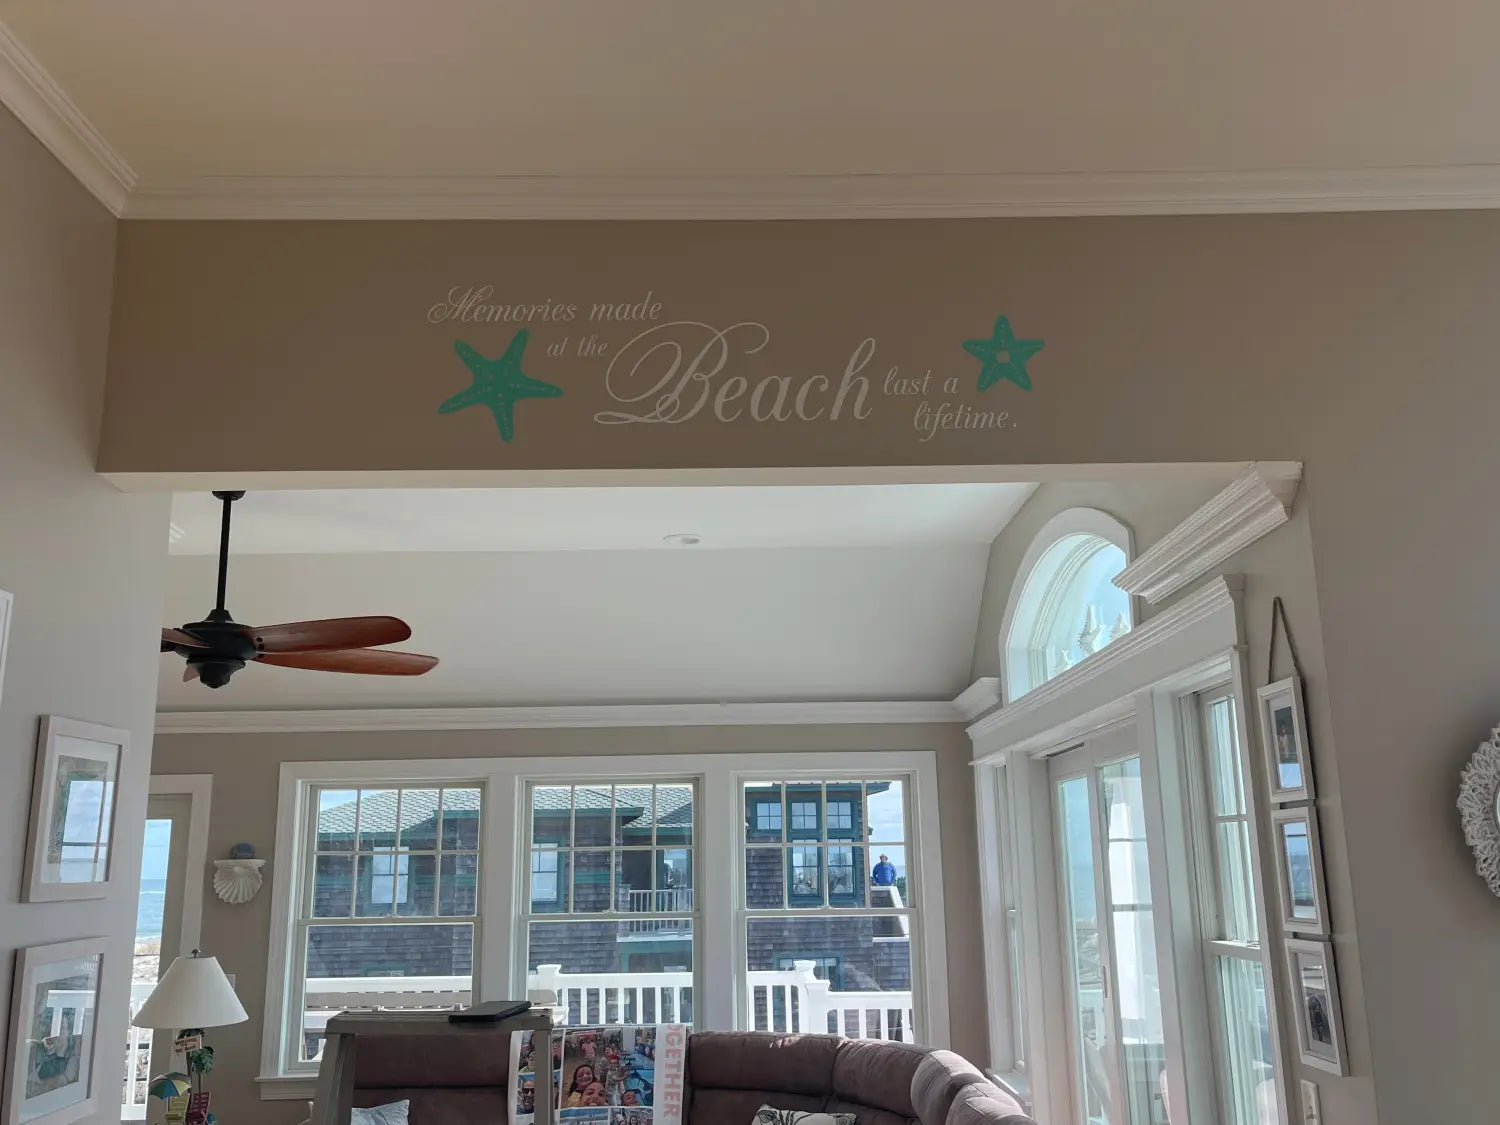 A sun-drenched beach panorama adorns a cozy living room wall, framed by a custom decal reading "Memories made at the beach last a lifetime." Starfish add a touch of coastal charm to this personalized beach house decor.